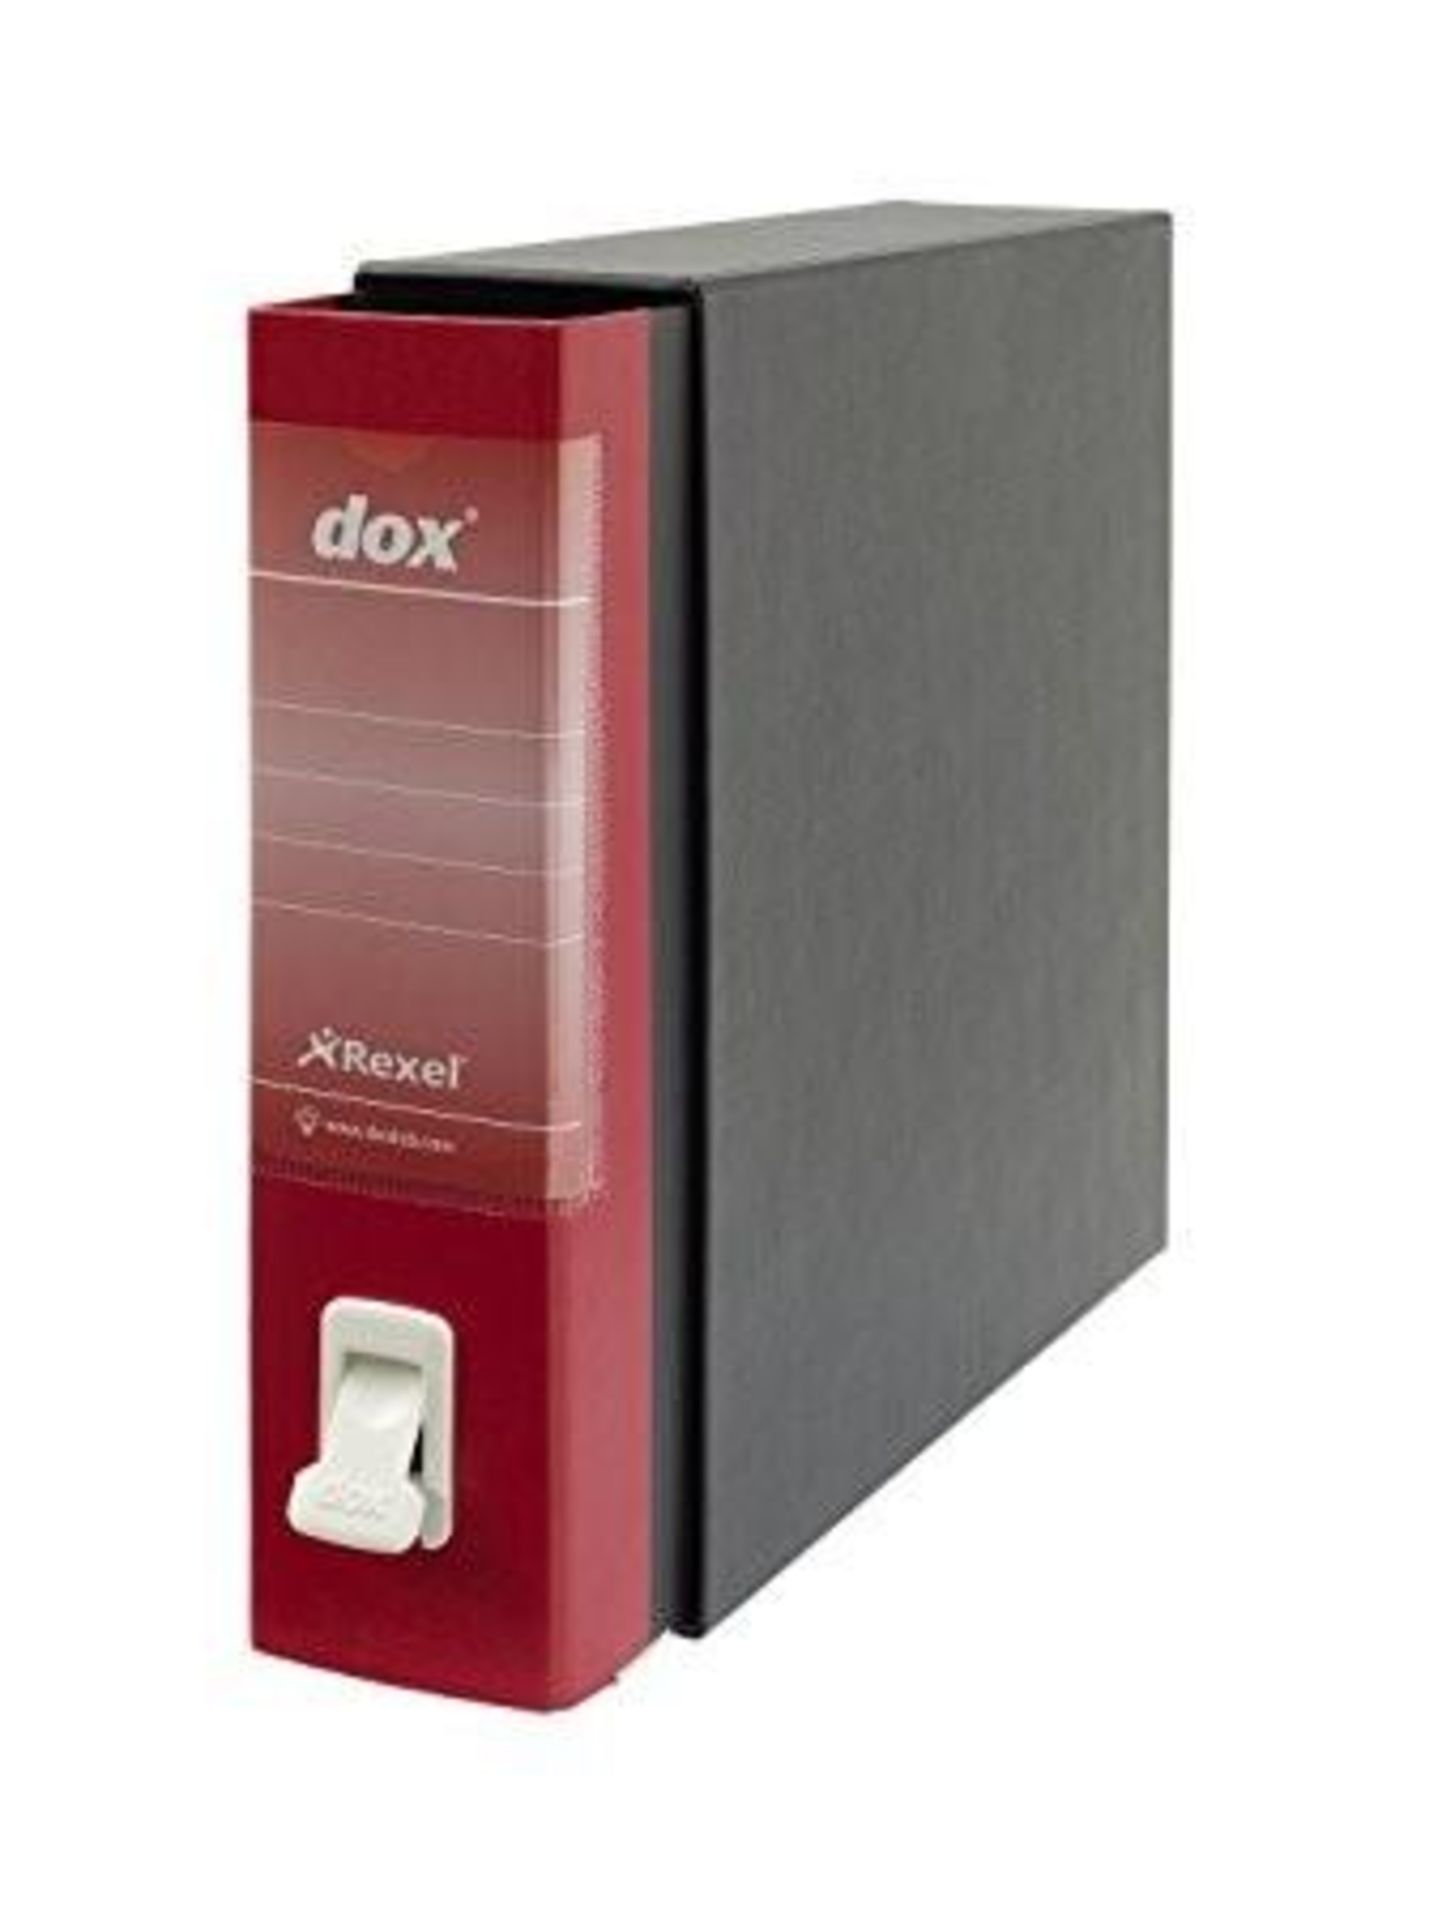 5 x Rexel Dox A4 Lever Arch Files - Ideal For Open Shelf Filing System - New and Unused - CL010 - - Image 2 of 2